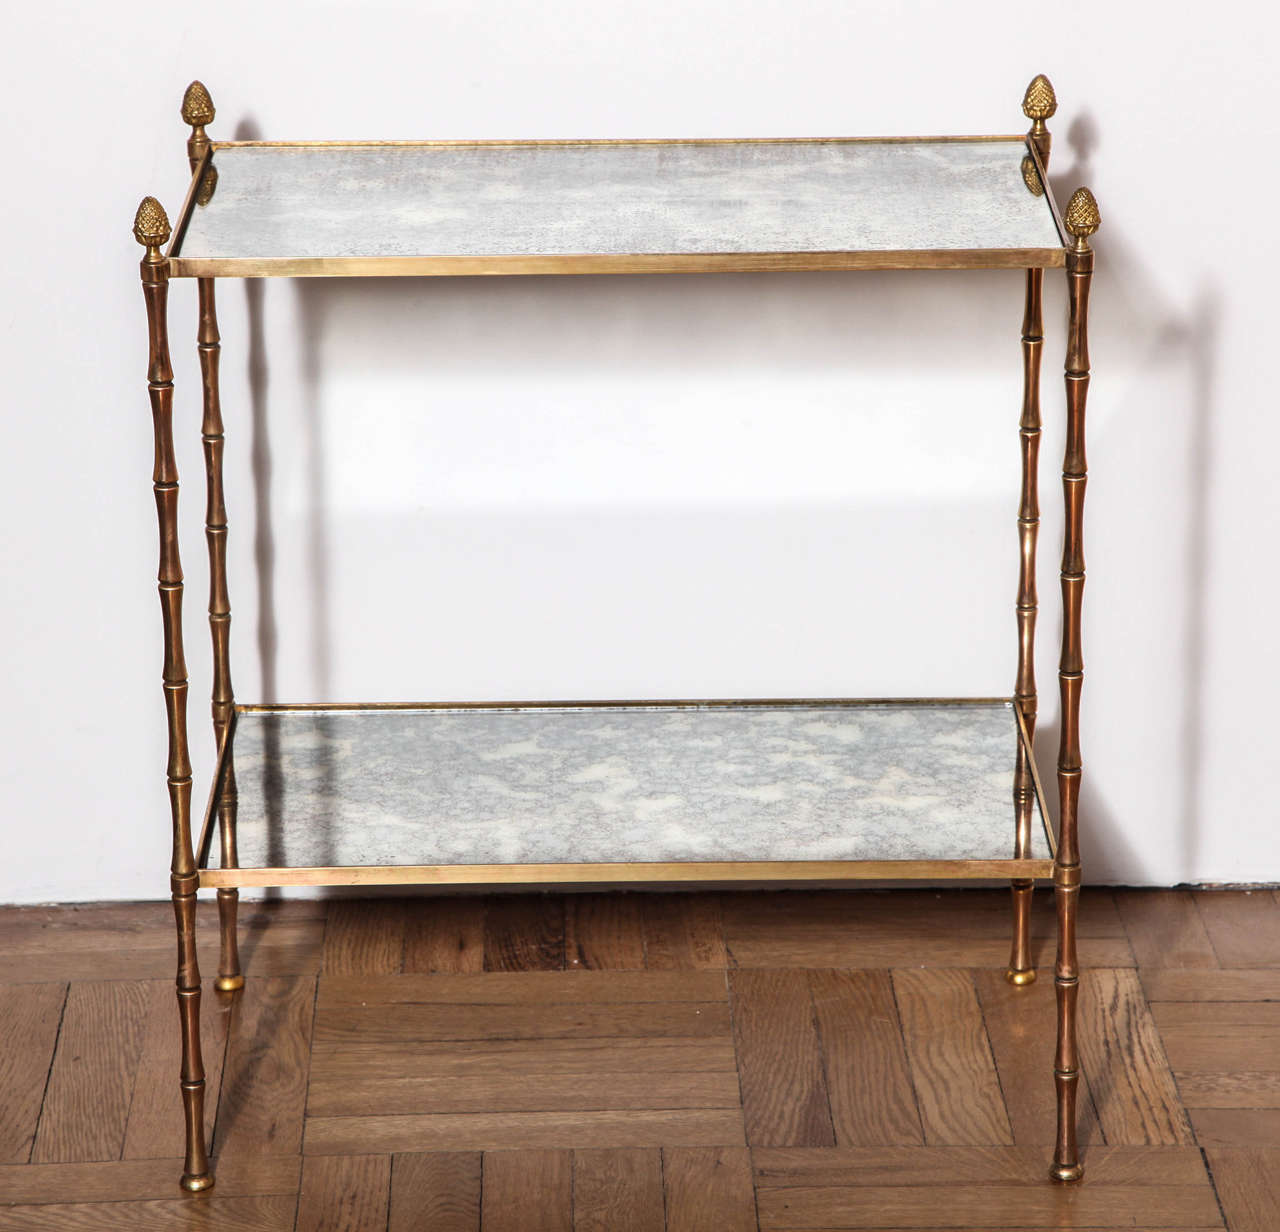 A Gilt Brass Faux Bamboo Two Tier Etagere Table with Antiqued Mirrored Glass, France c. 1950